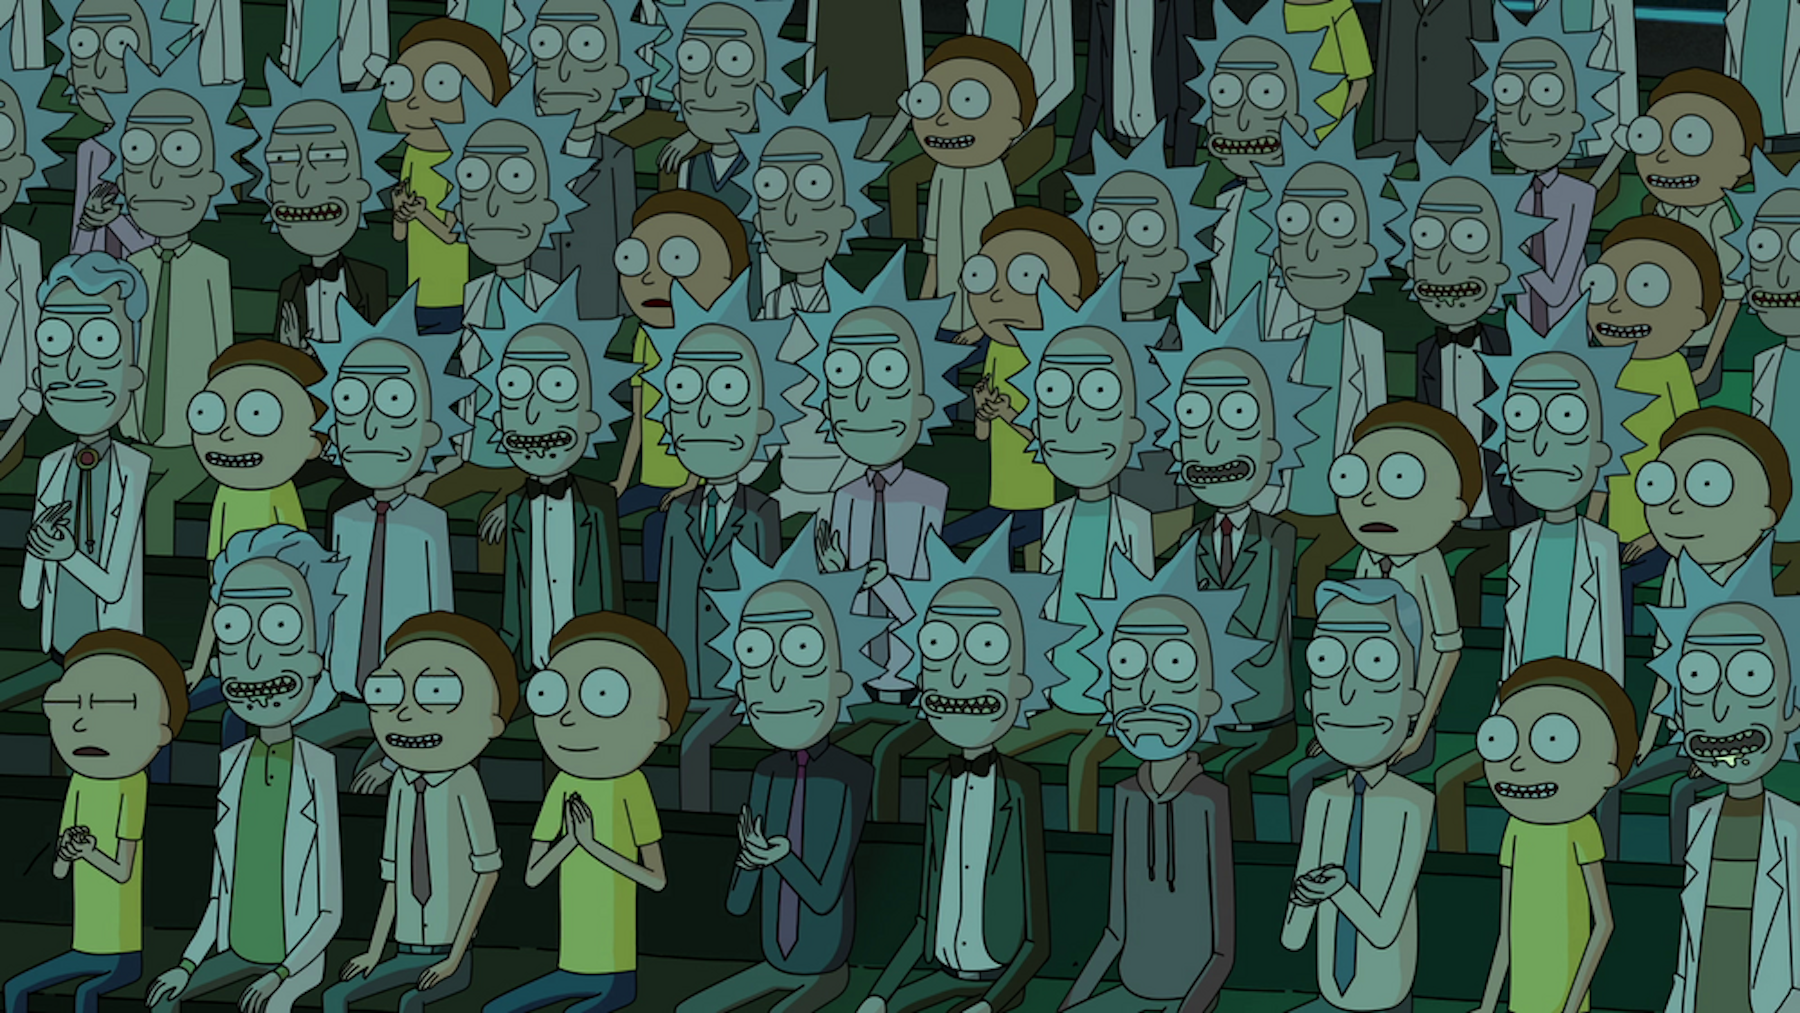 A group of Ricks and Mortys from multiple dimensions.